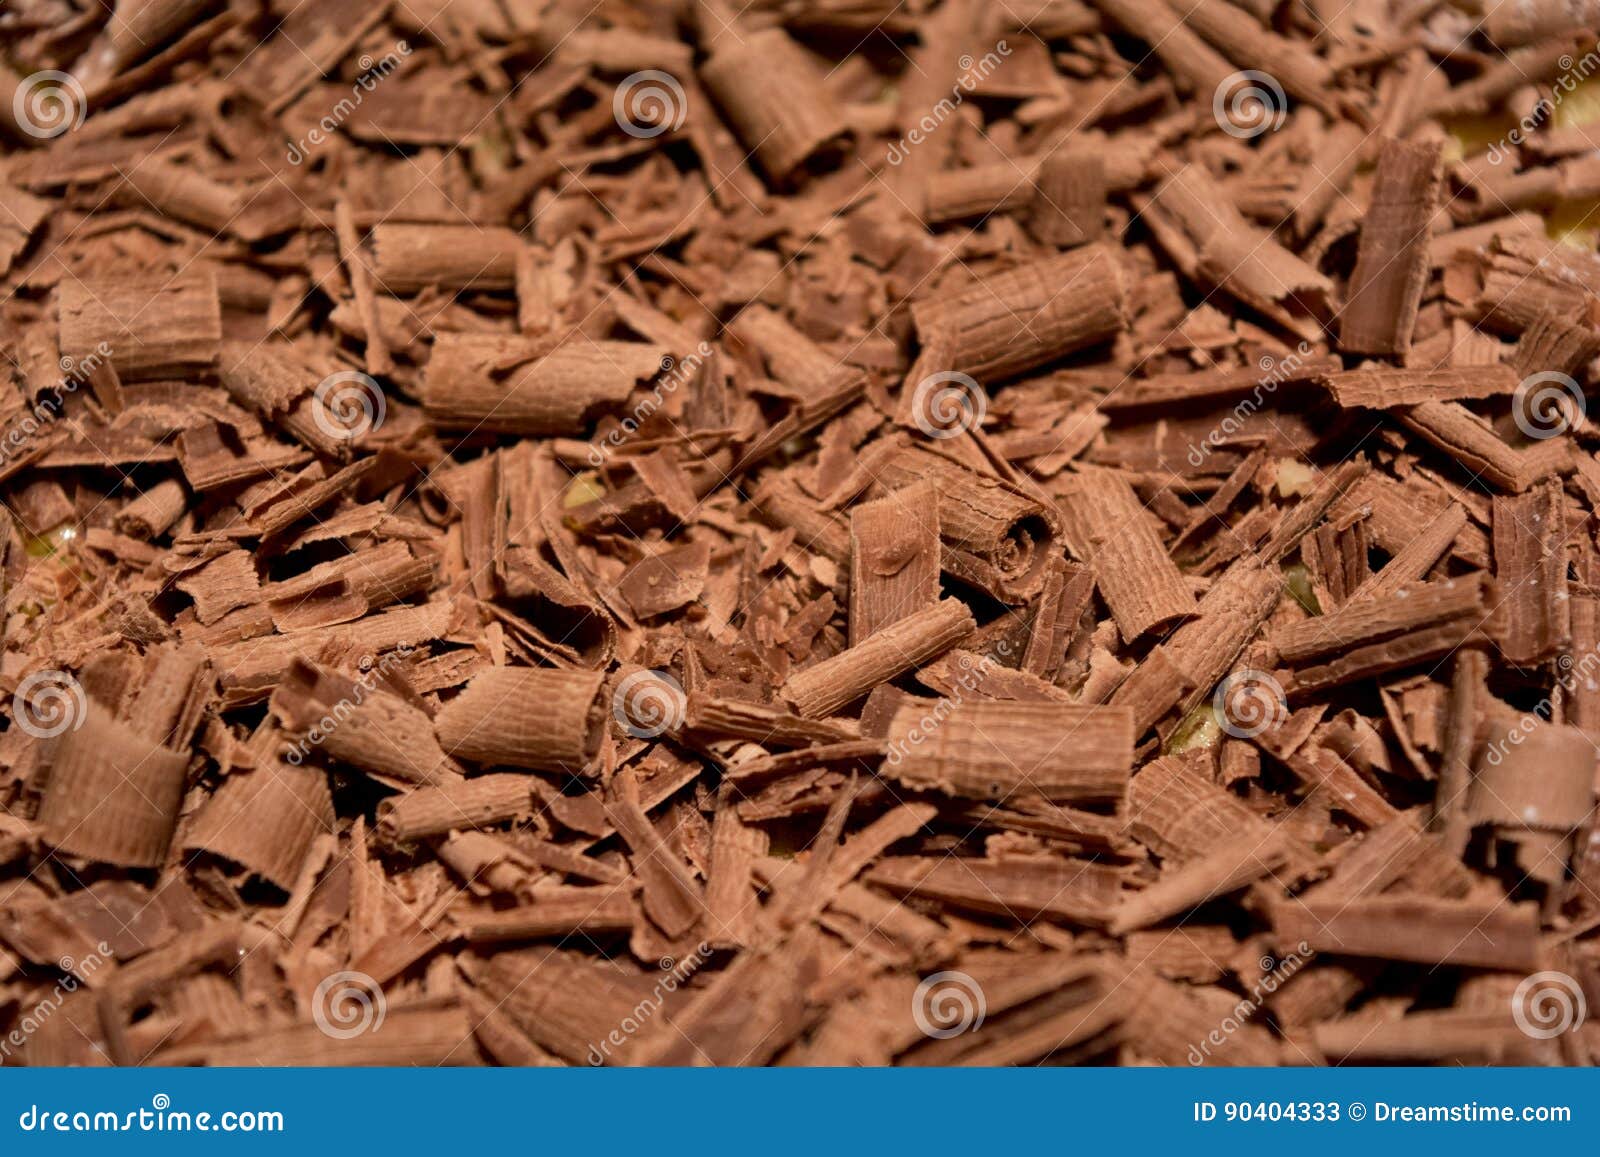 a lot of rolled chocolate